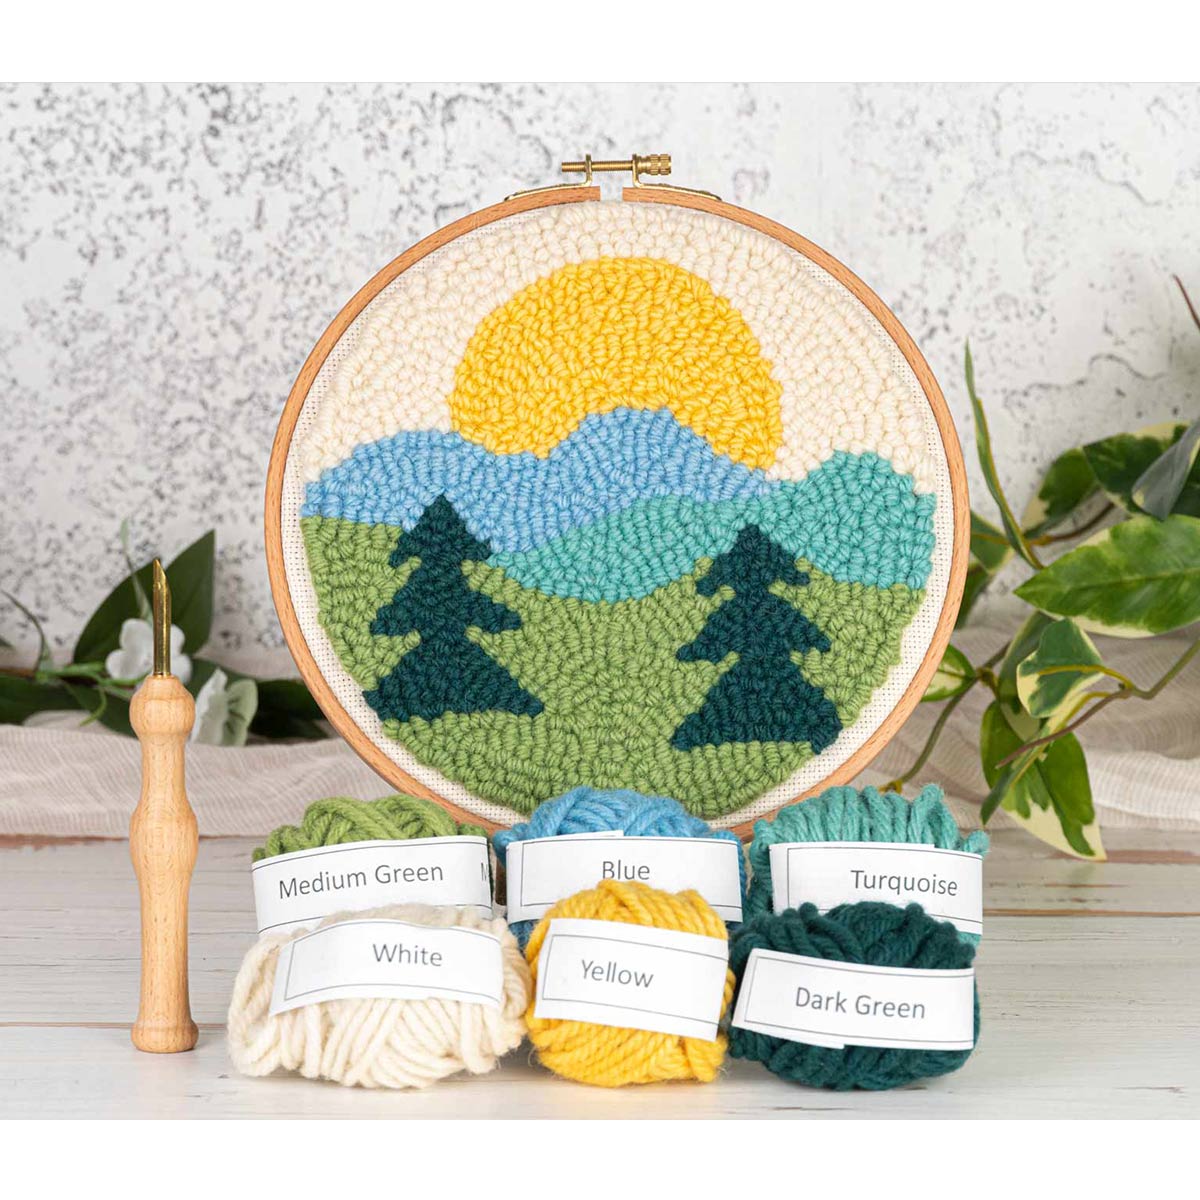 Scenery Pattern Punch Needle Embroidery Starter Set With Yarn